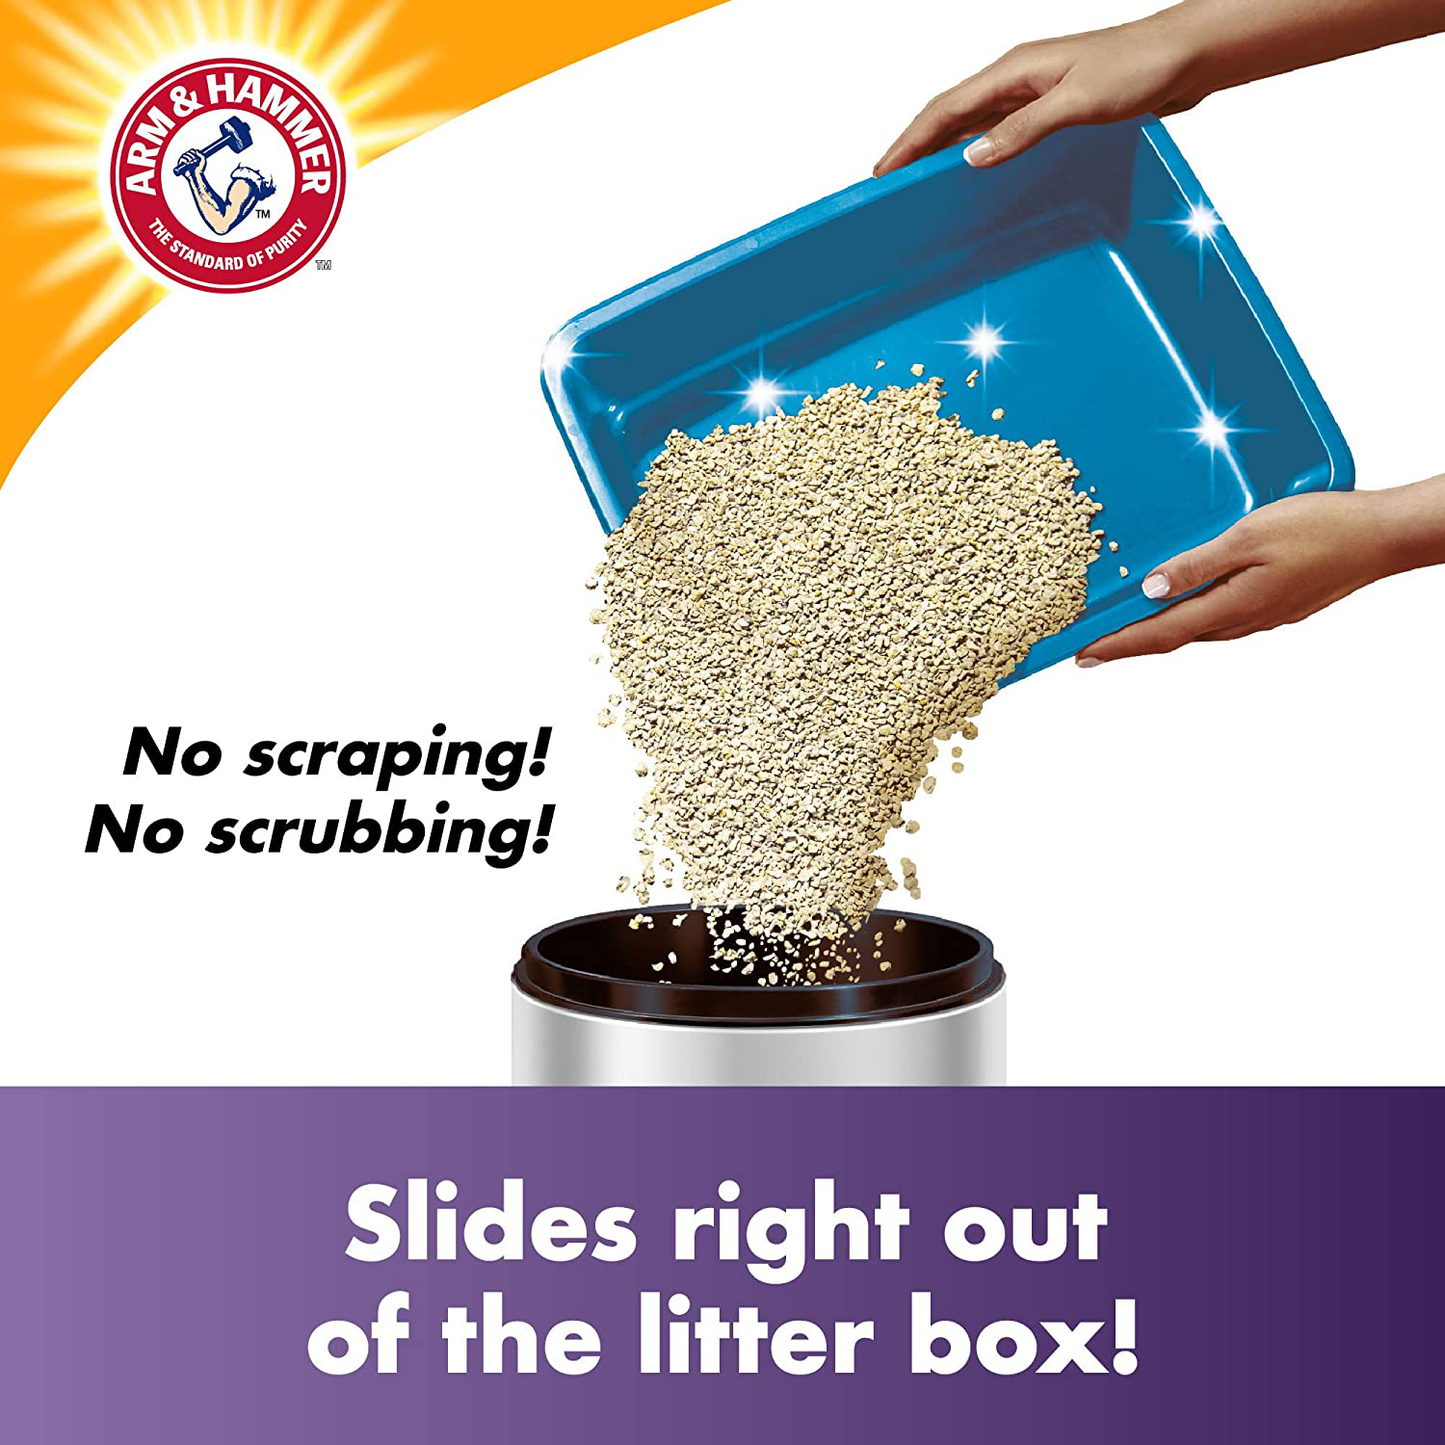 Arm & Hammer Easy Clean-Up Litter Animals & Pet Supplies > Pet Supplies > Cat Supplies > Cat Litter Arm & Hammer   